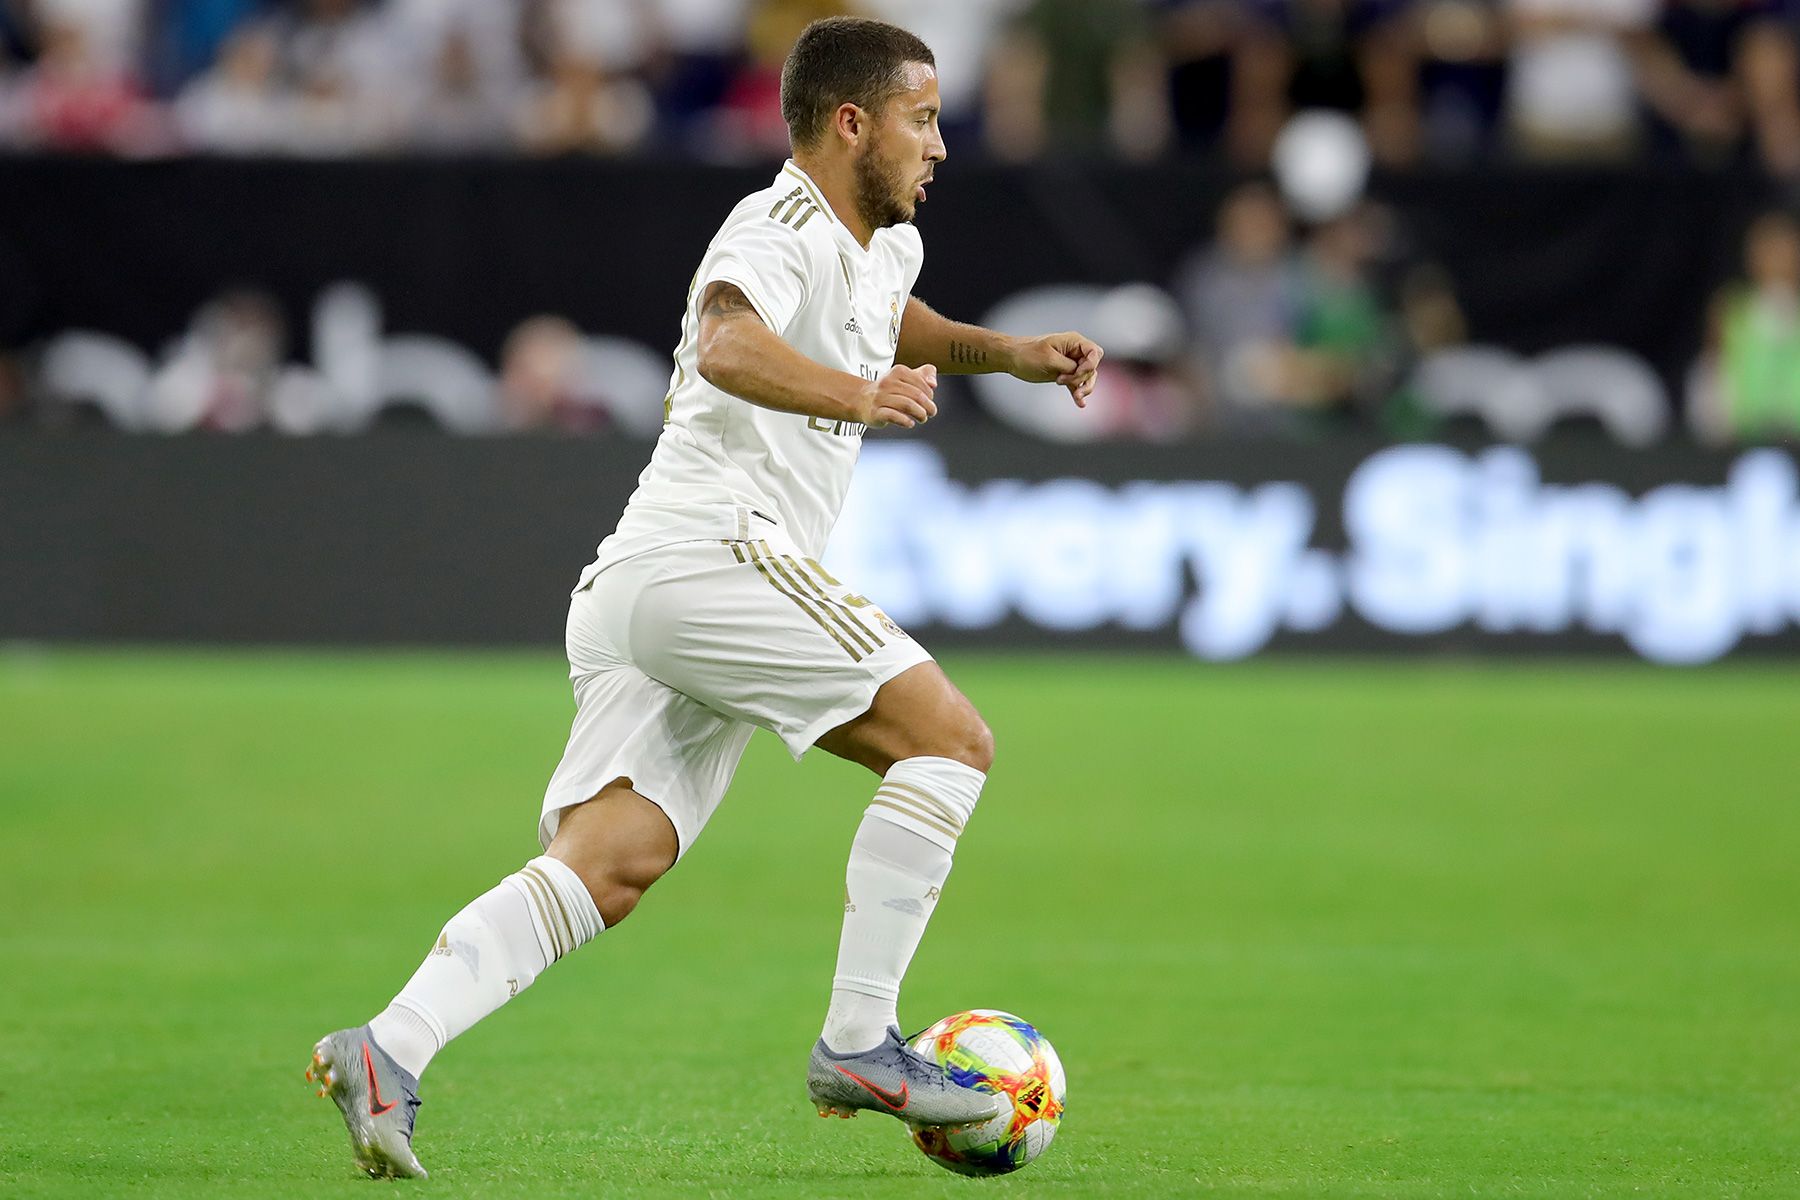 Eden Hazard in a match of Real Madrid in the preseason